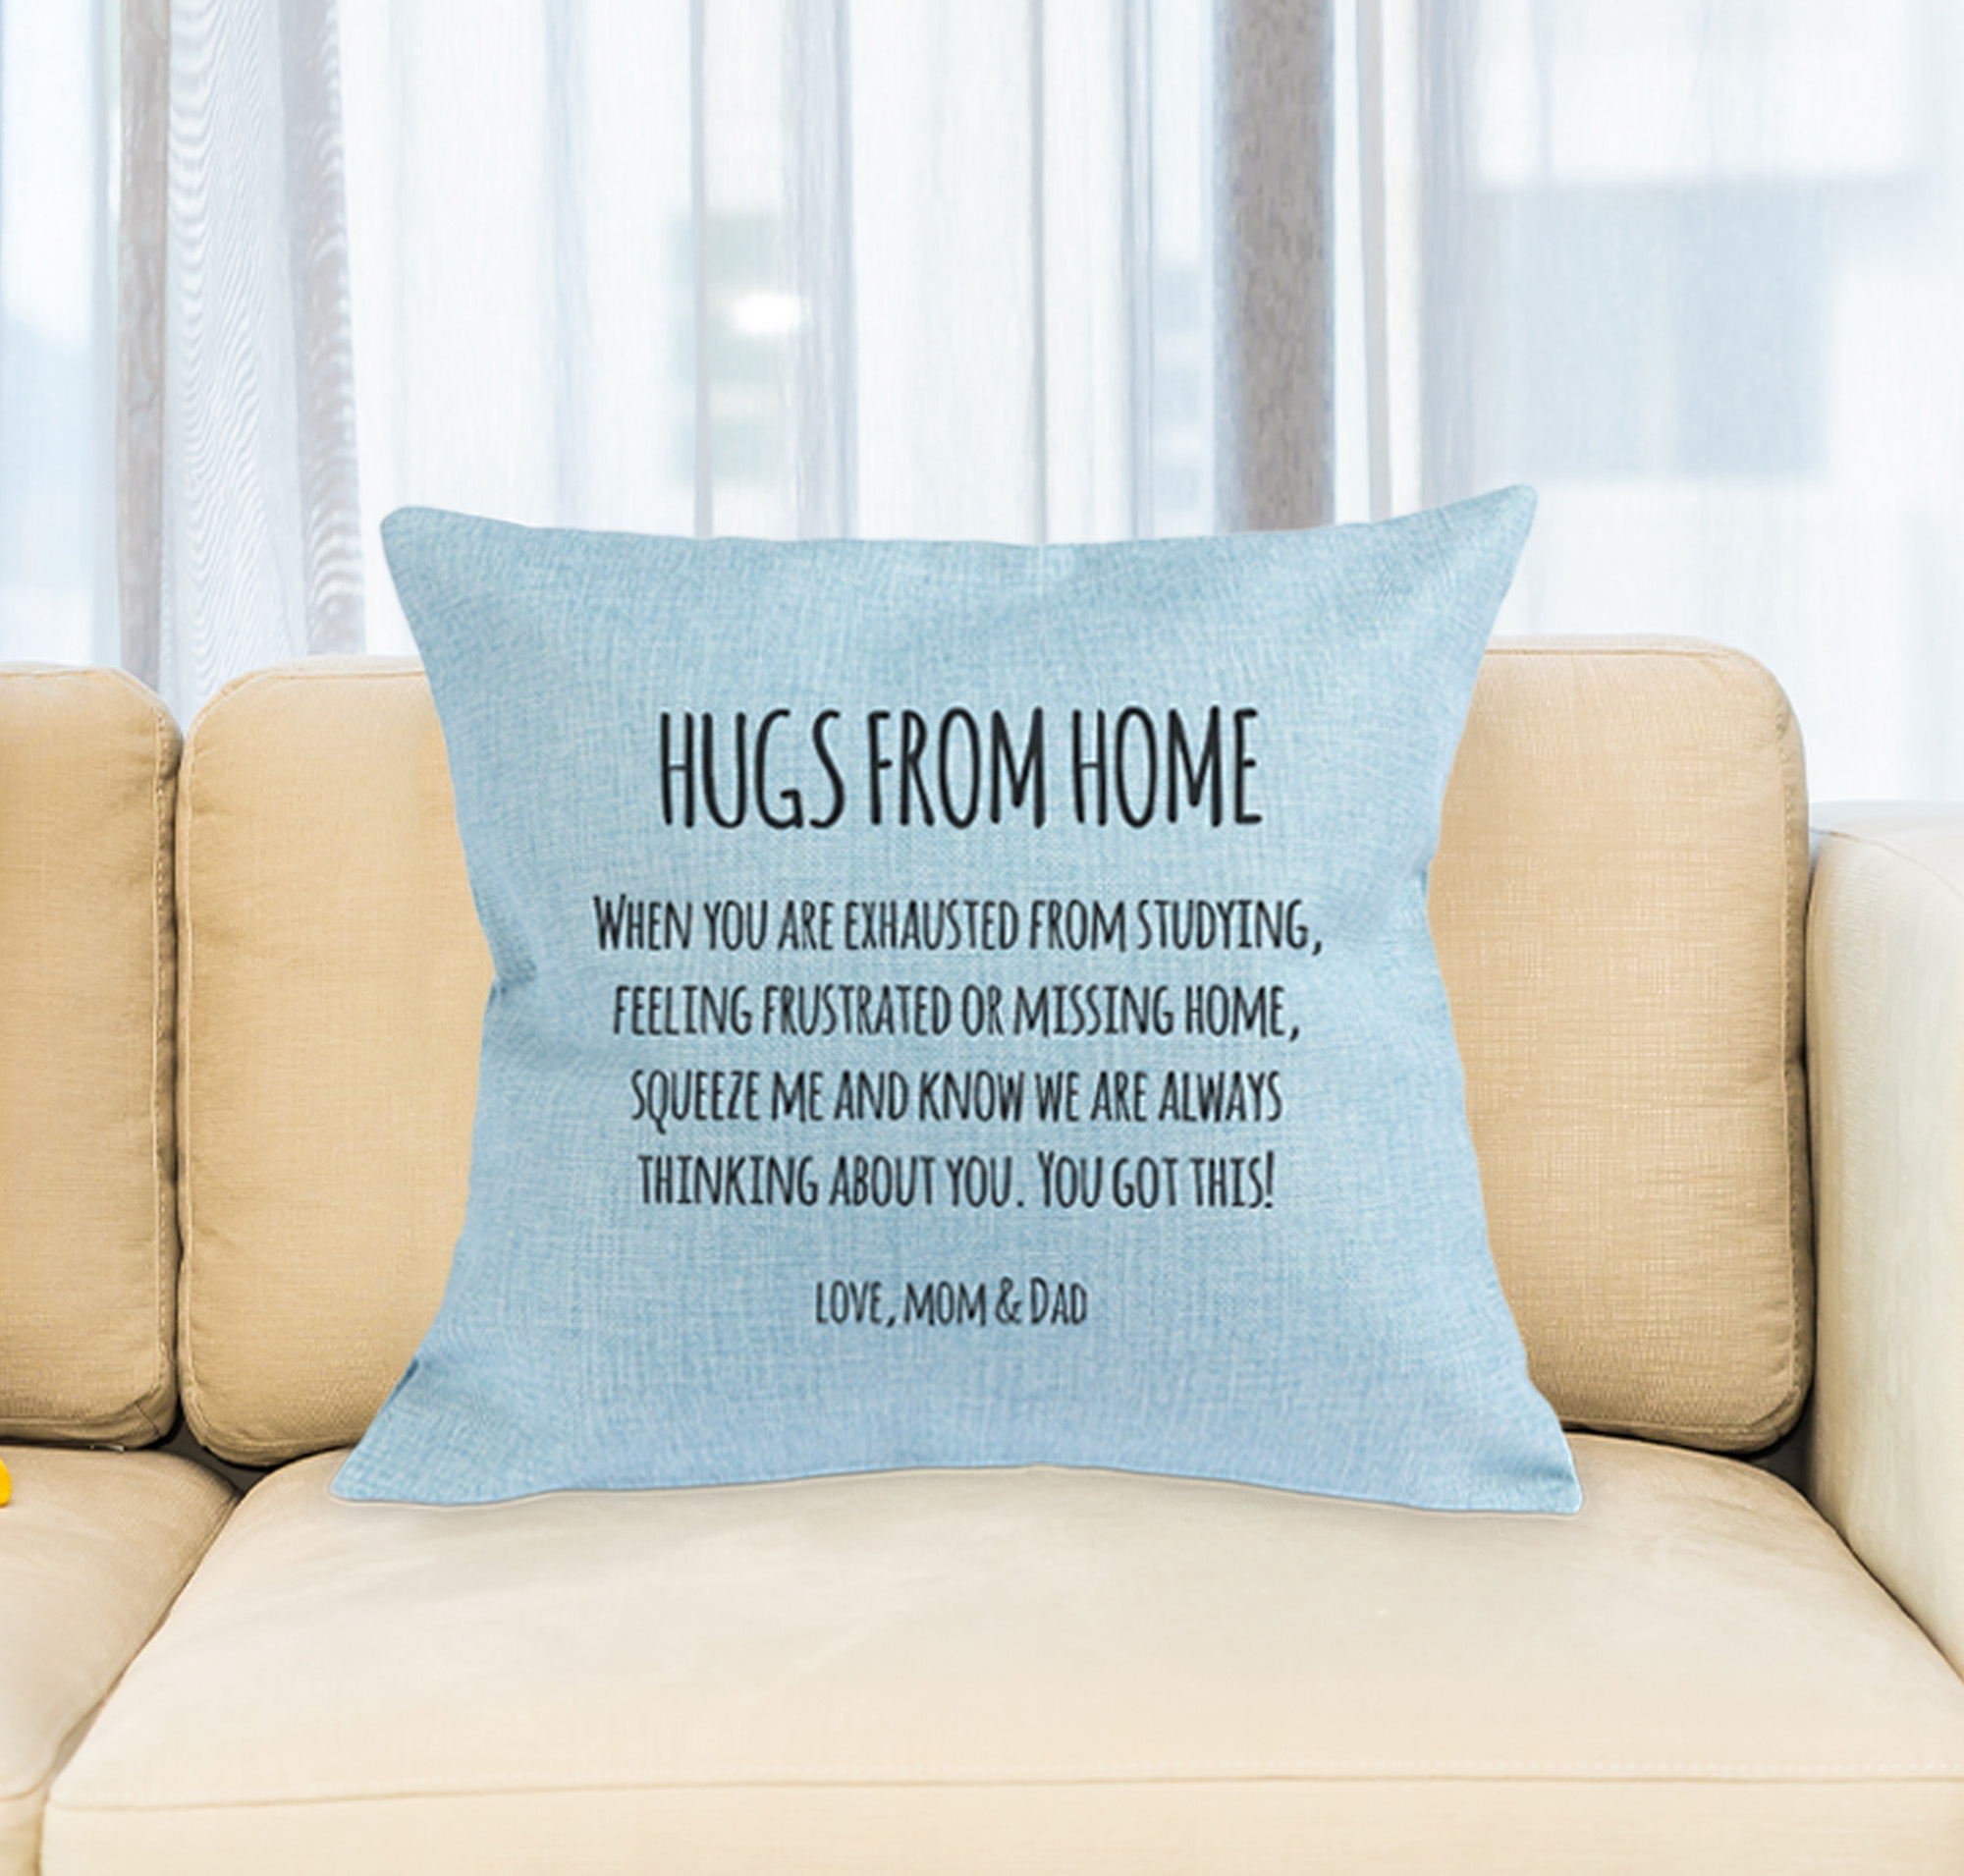 cushion personalized with a poem and is placed on a couch